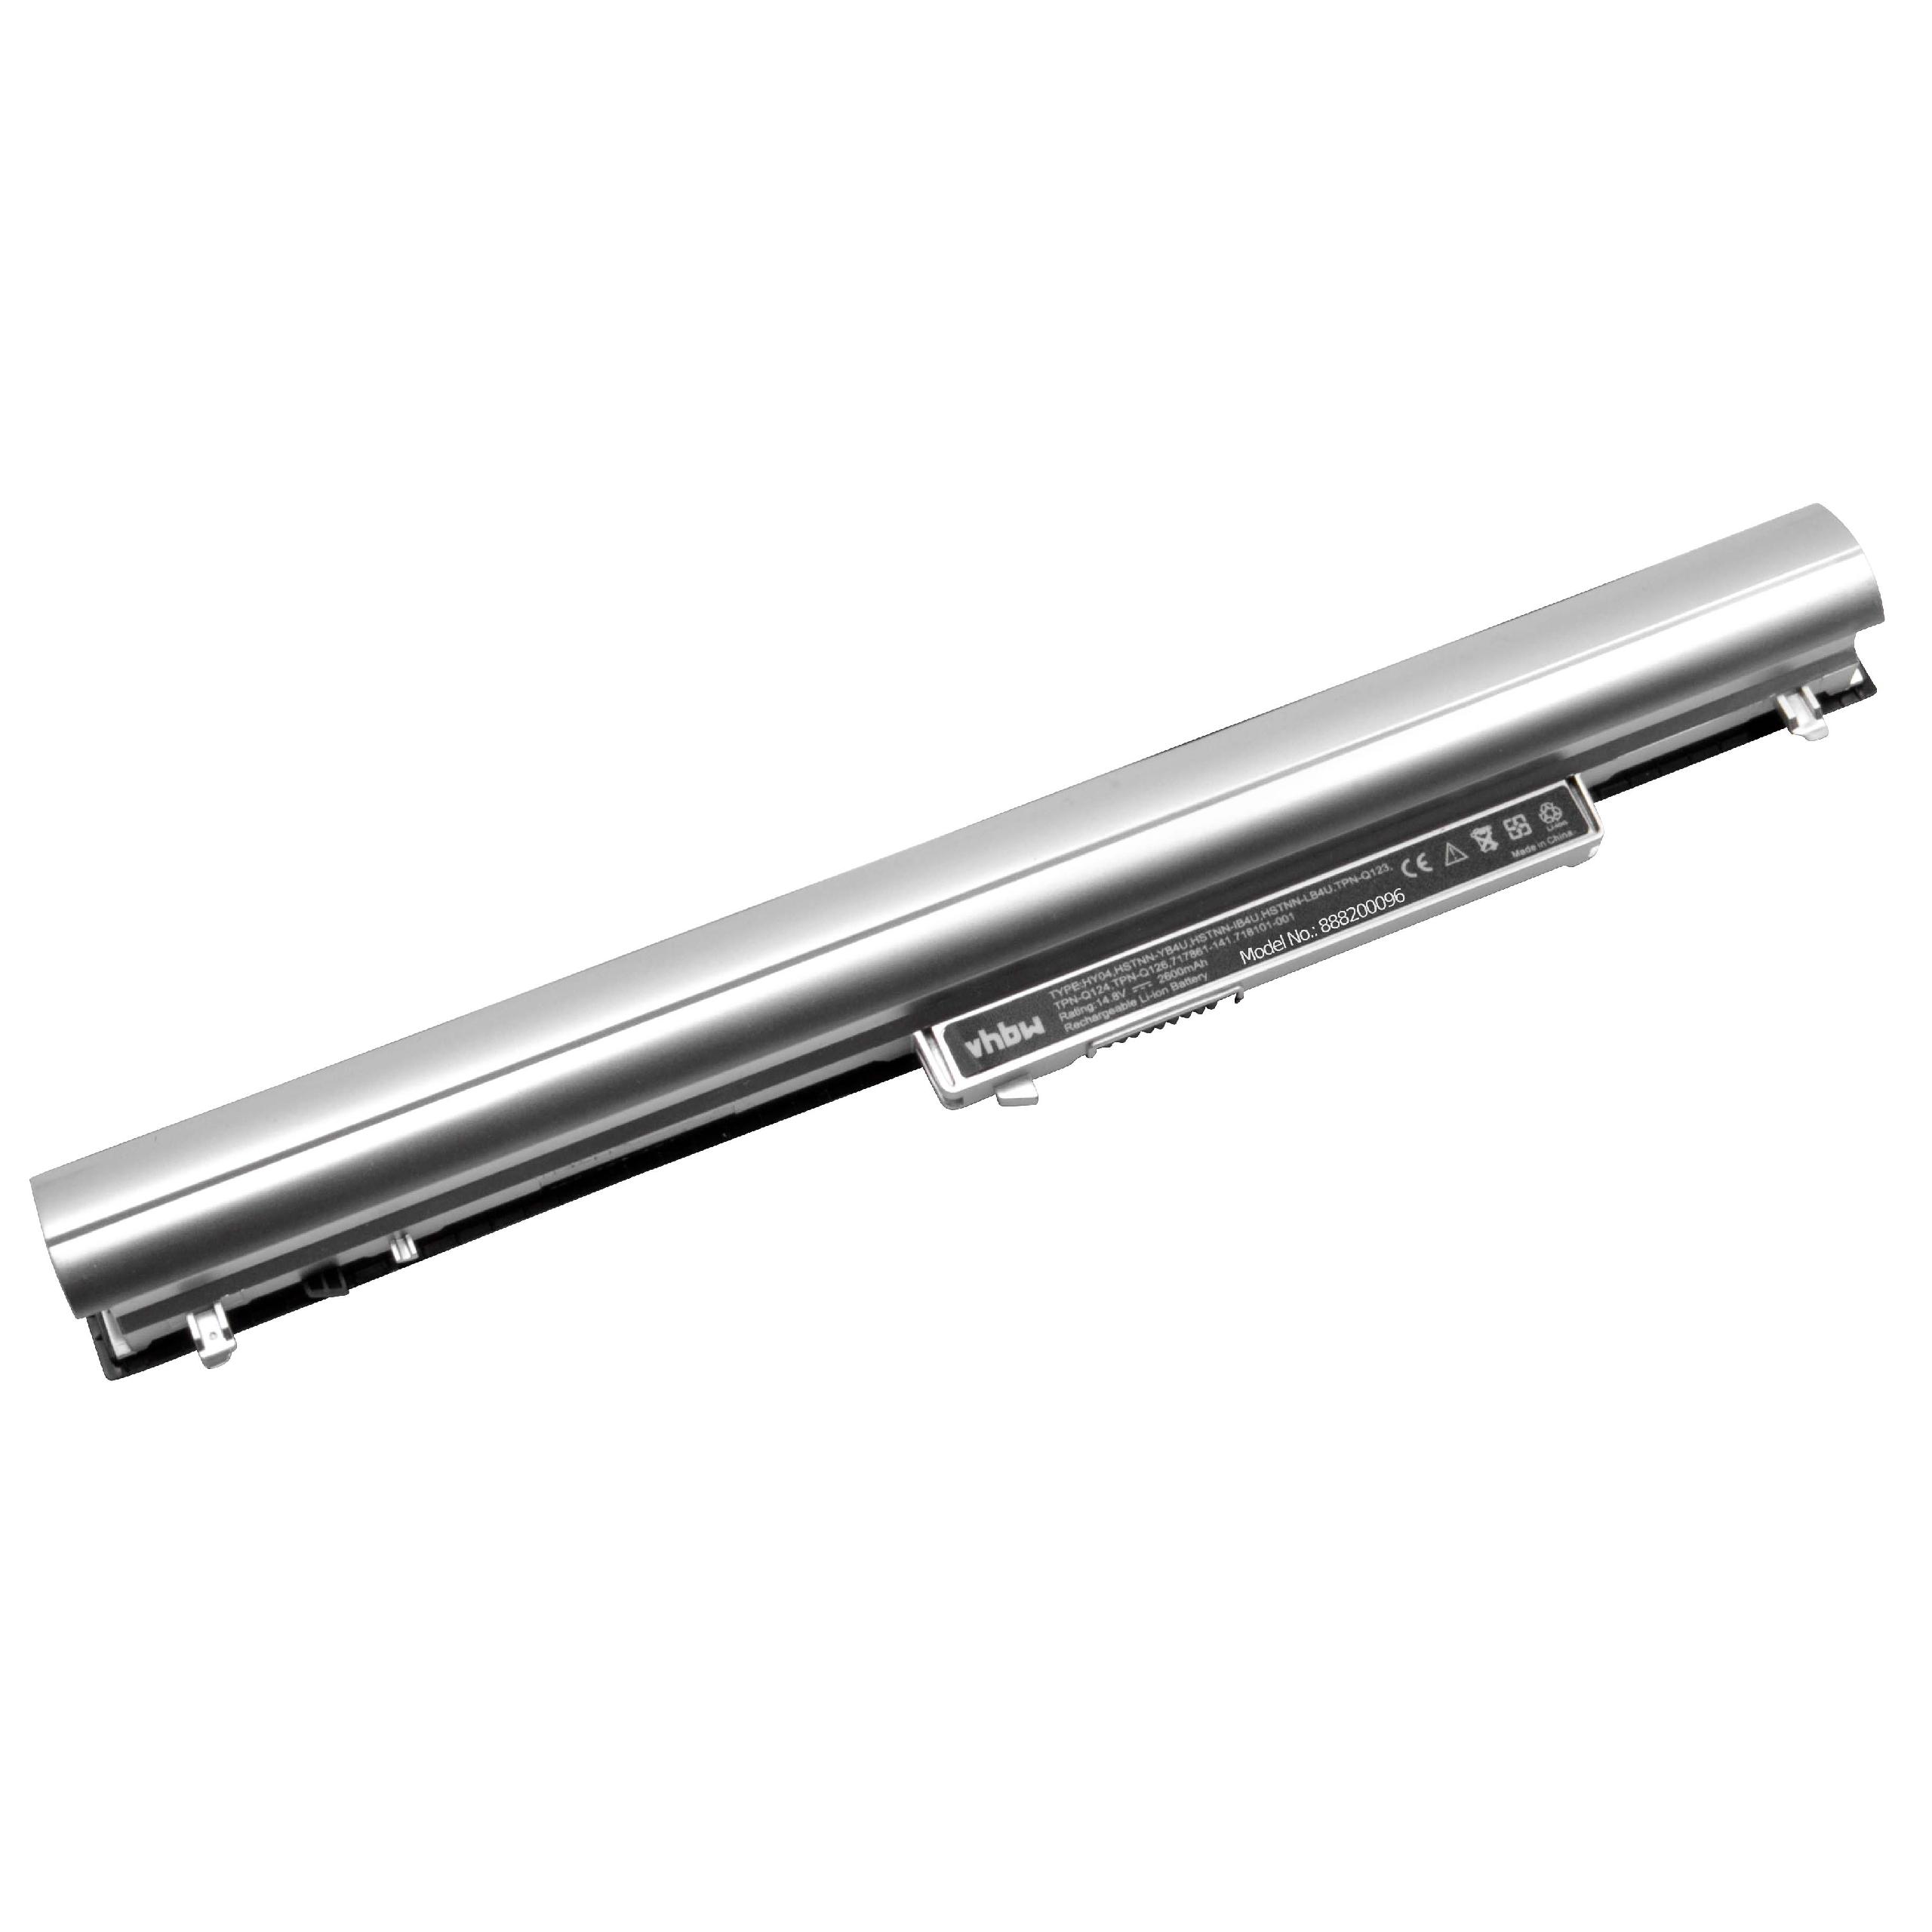 Notebook Battery Replacement for HP 718101-001, 717861-141, H6L39AA#ABB - 2600mAh 14.8V Li-Ion, silver